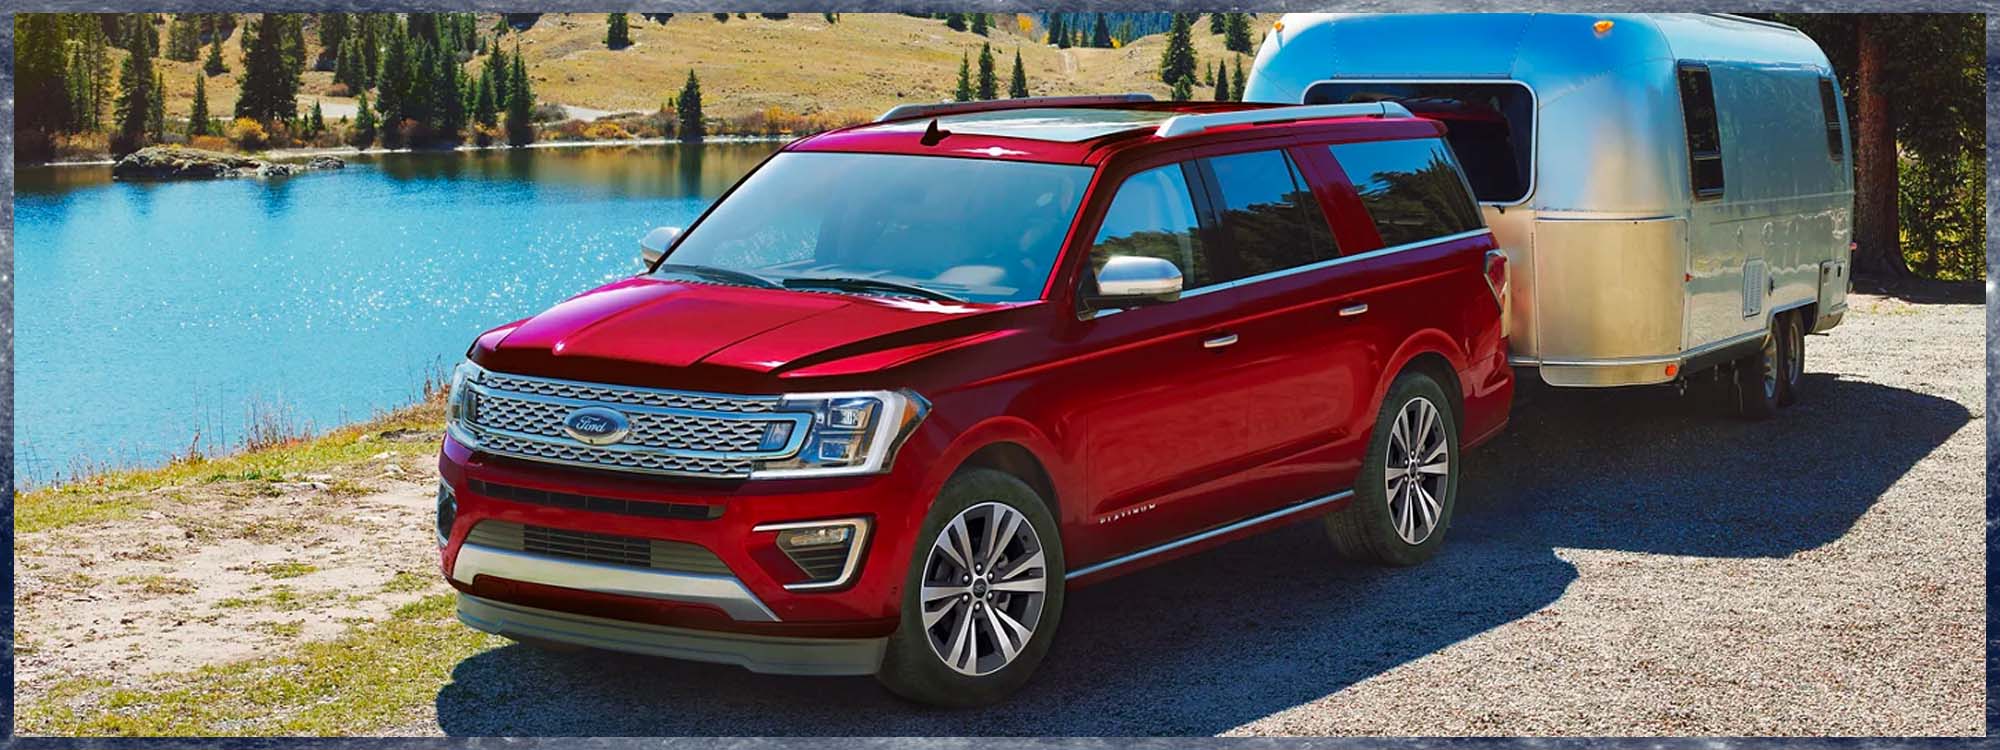 Ford Expedition Towing Capacity